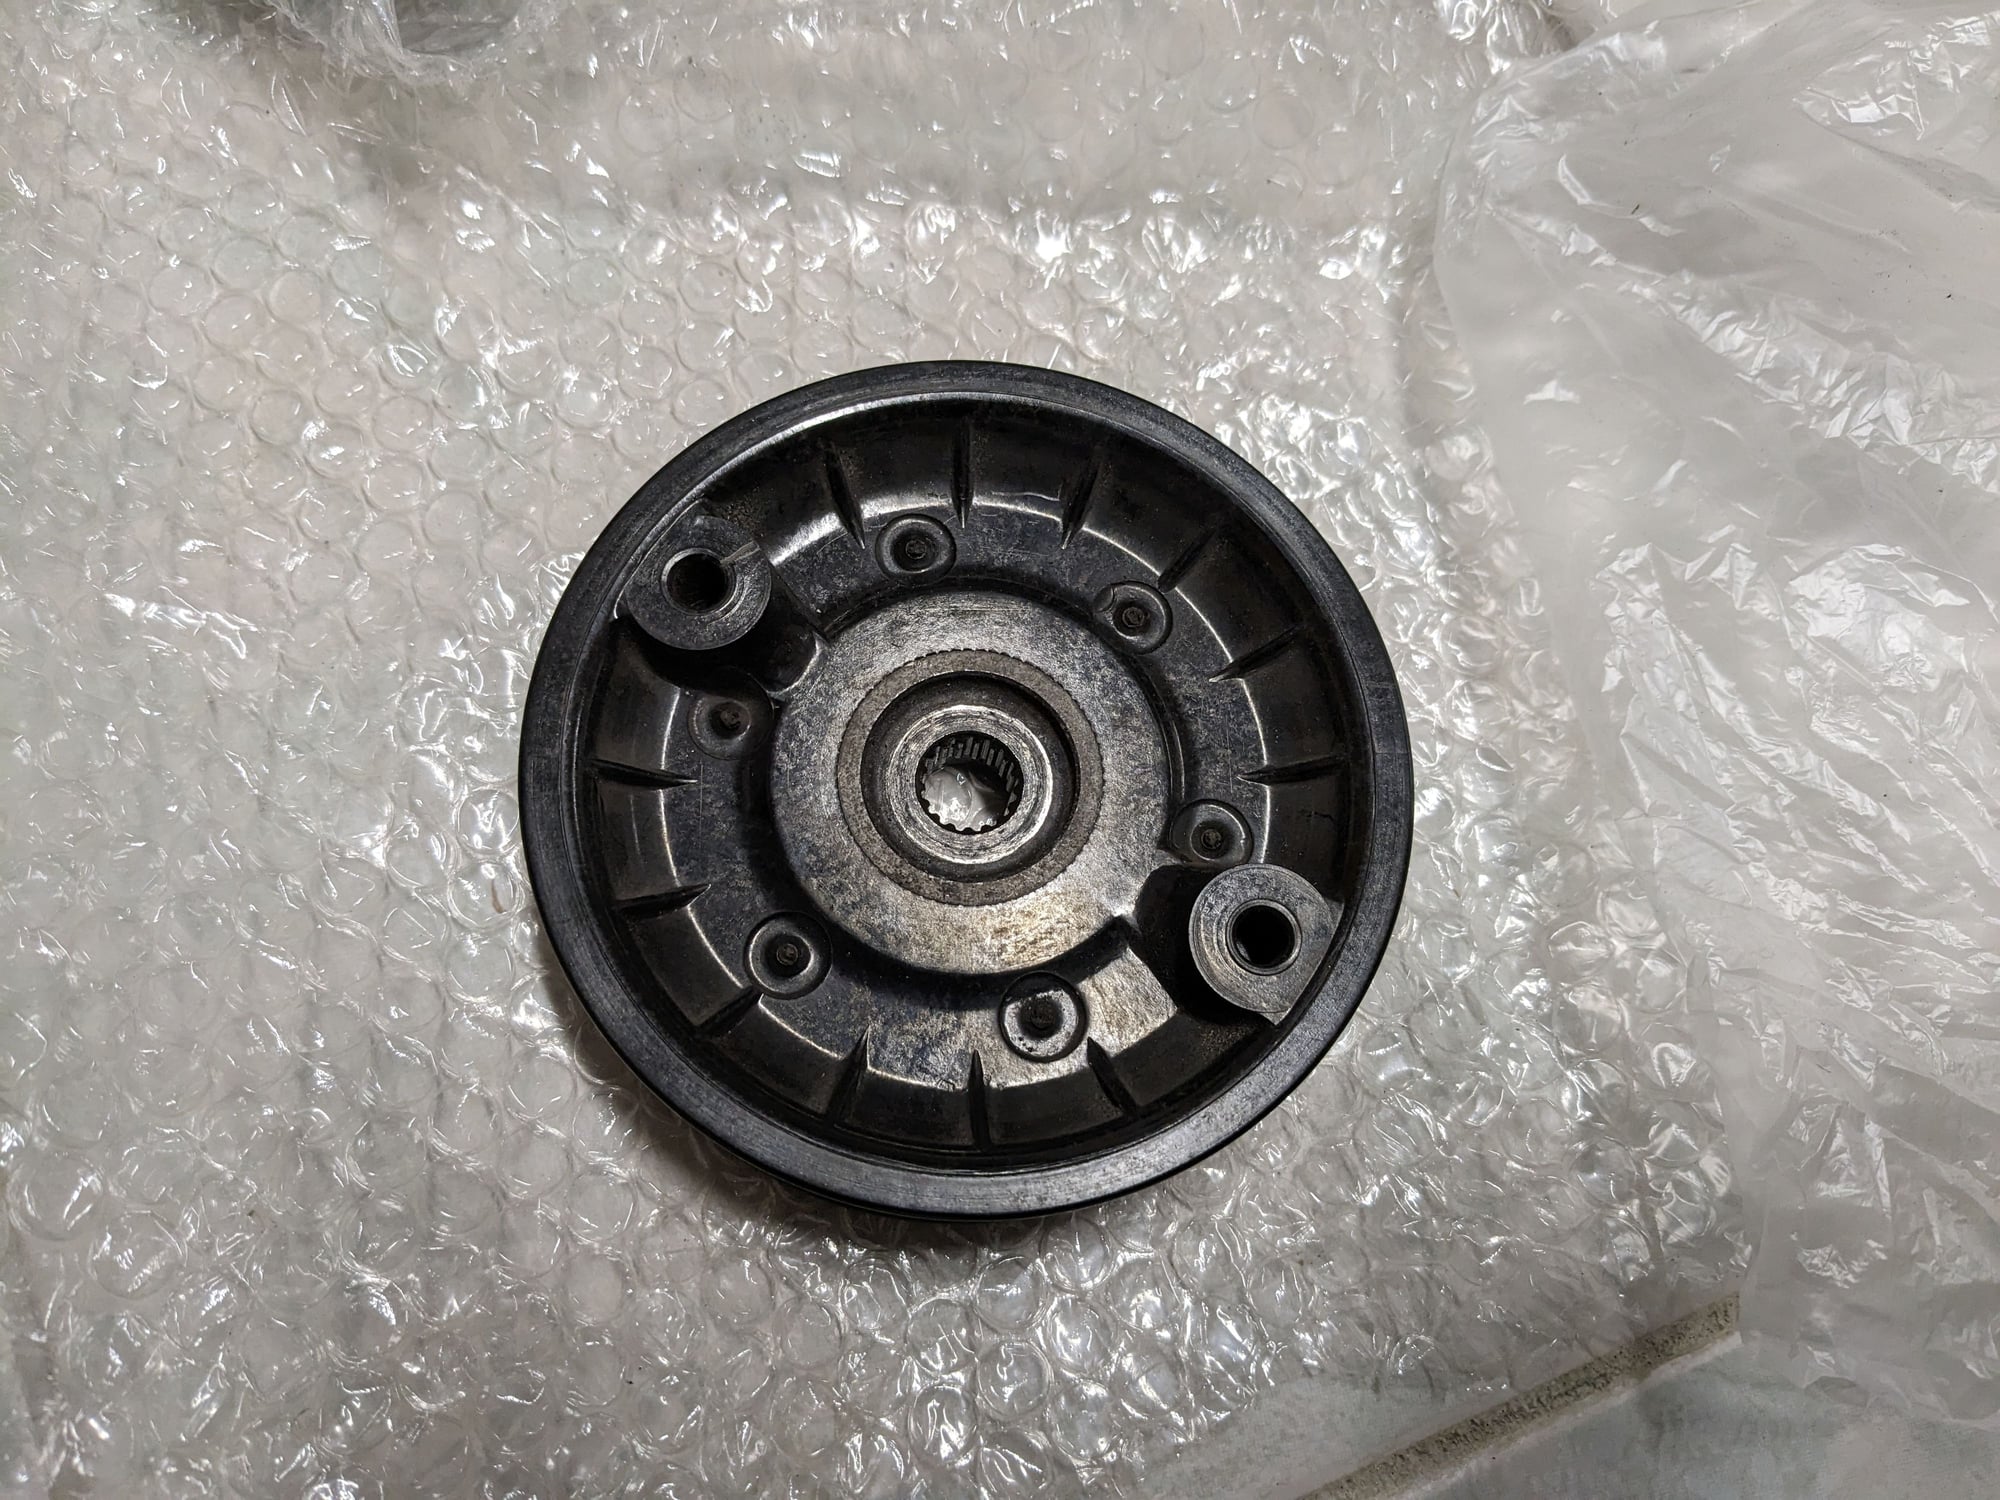 Miscellaneous - Banzai Racing Main Pulley & OEM PS Pulley - New - 1993 to 2002 Mazda RX-7 - Brooklyn, NY 11204, United States